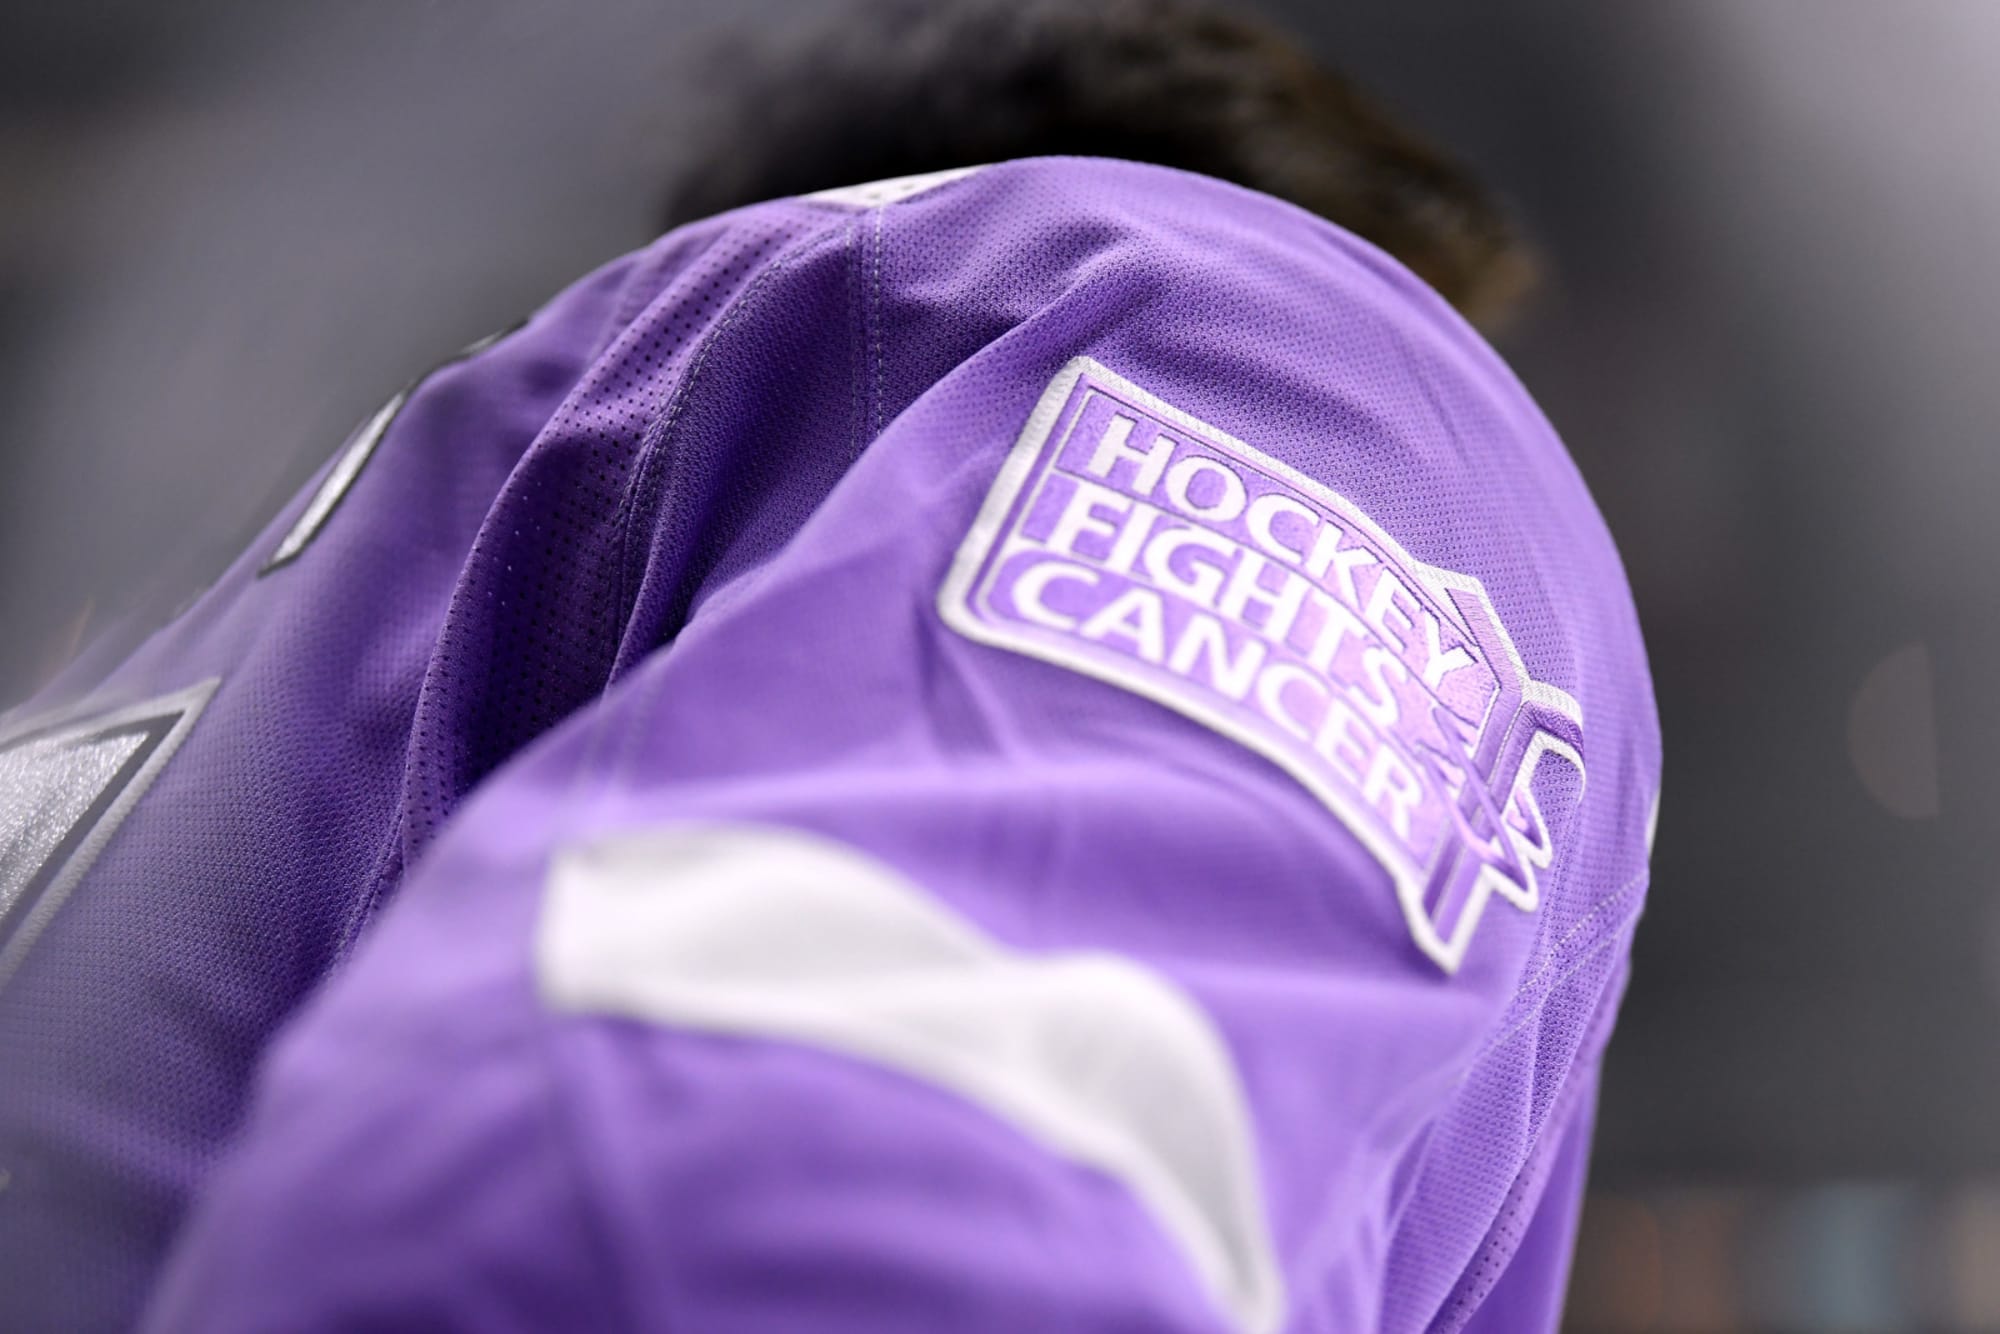 Hockey Fights Cancer warm up jerseys hang in the Colorado Avalanche News  Photo - Getty Images